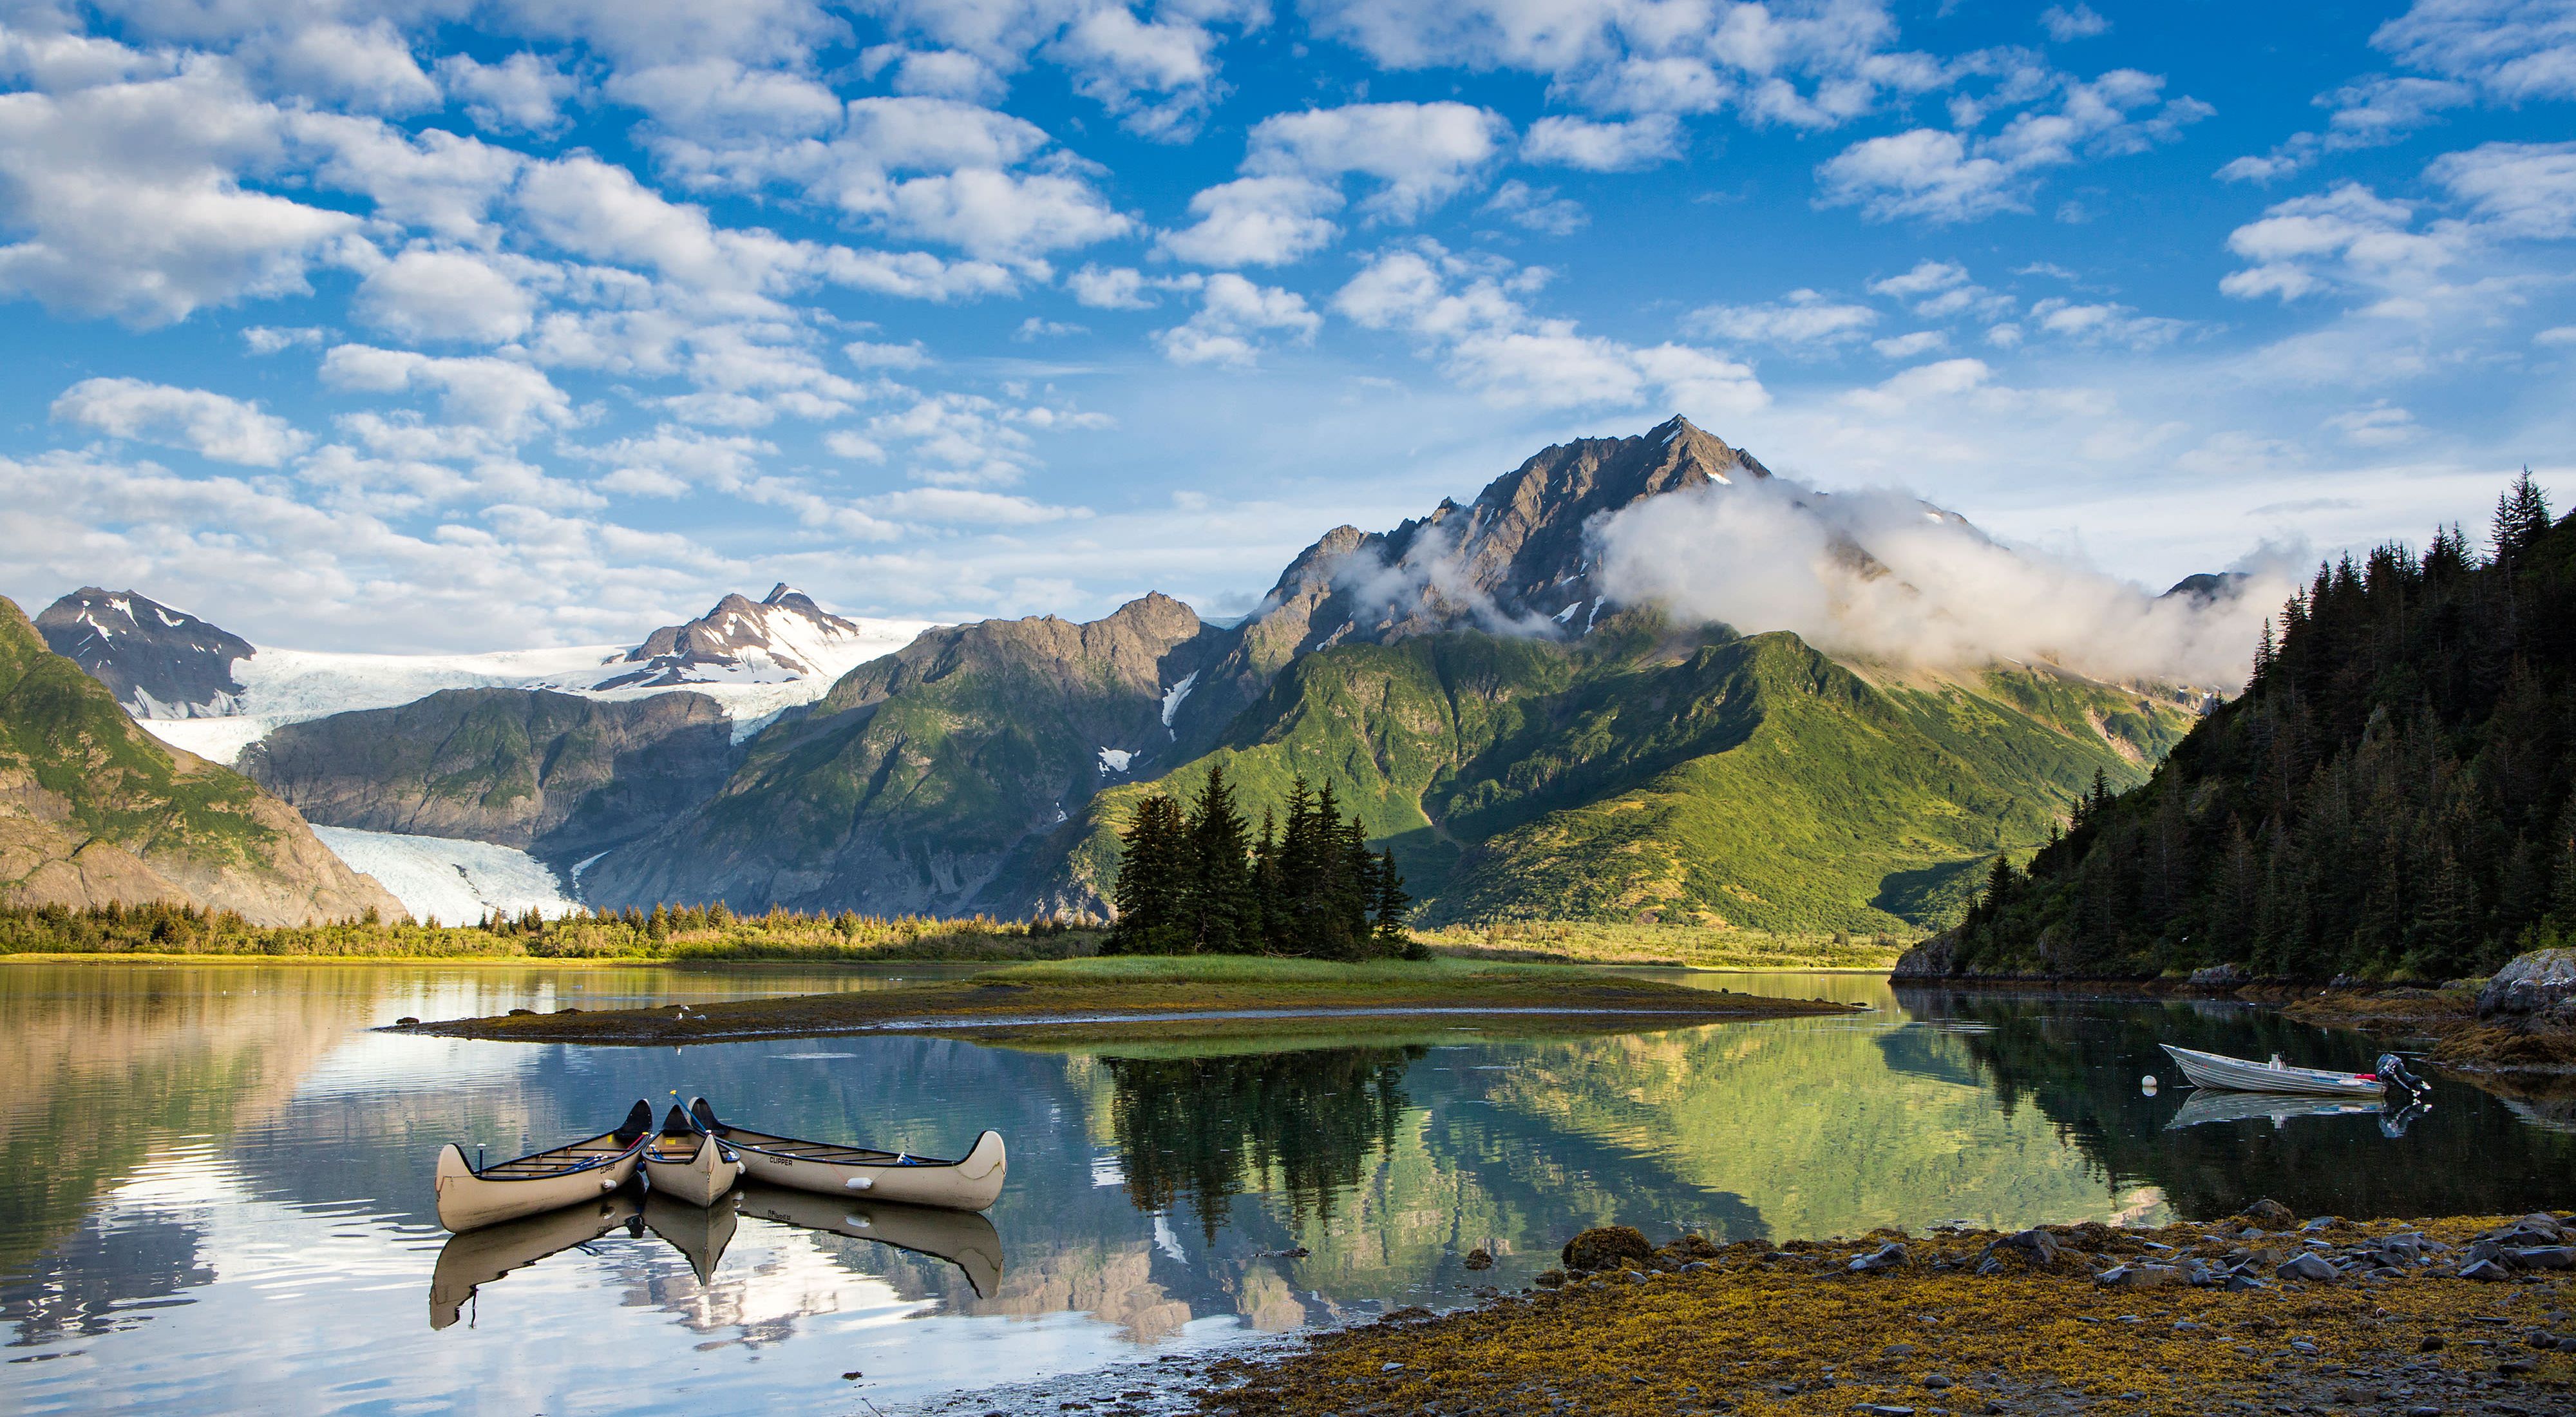 Scenic view of a still lake with three canoes floating on it with rugged green and snow-covered mountains in the background under a blue sky dotted with puffy clouds in Alaska.